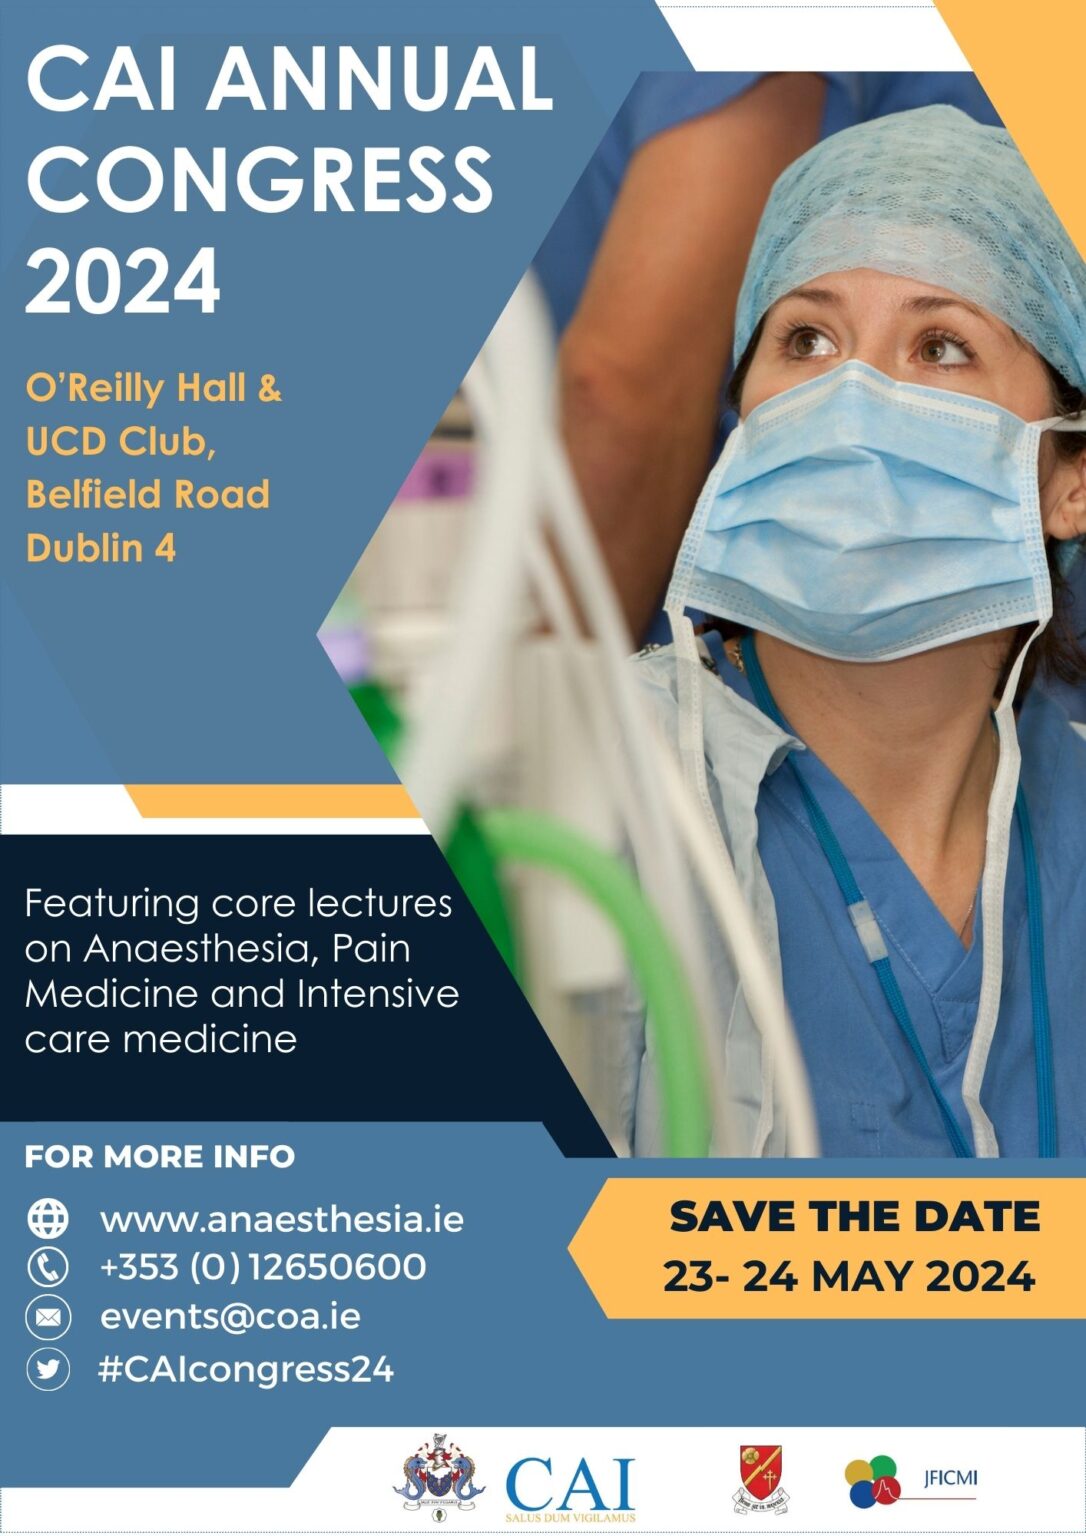 SAVE THE DATE! CAI Annual Congress of Anaesthesiology 2024 The